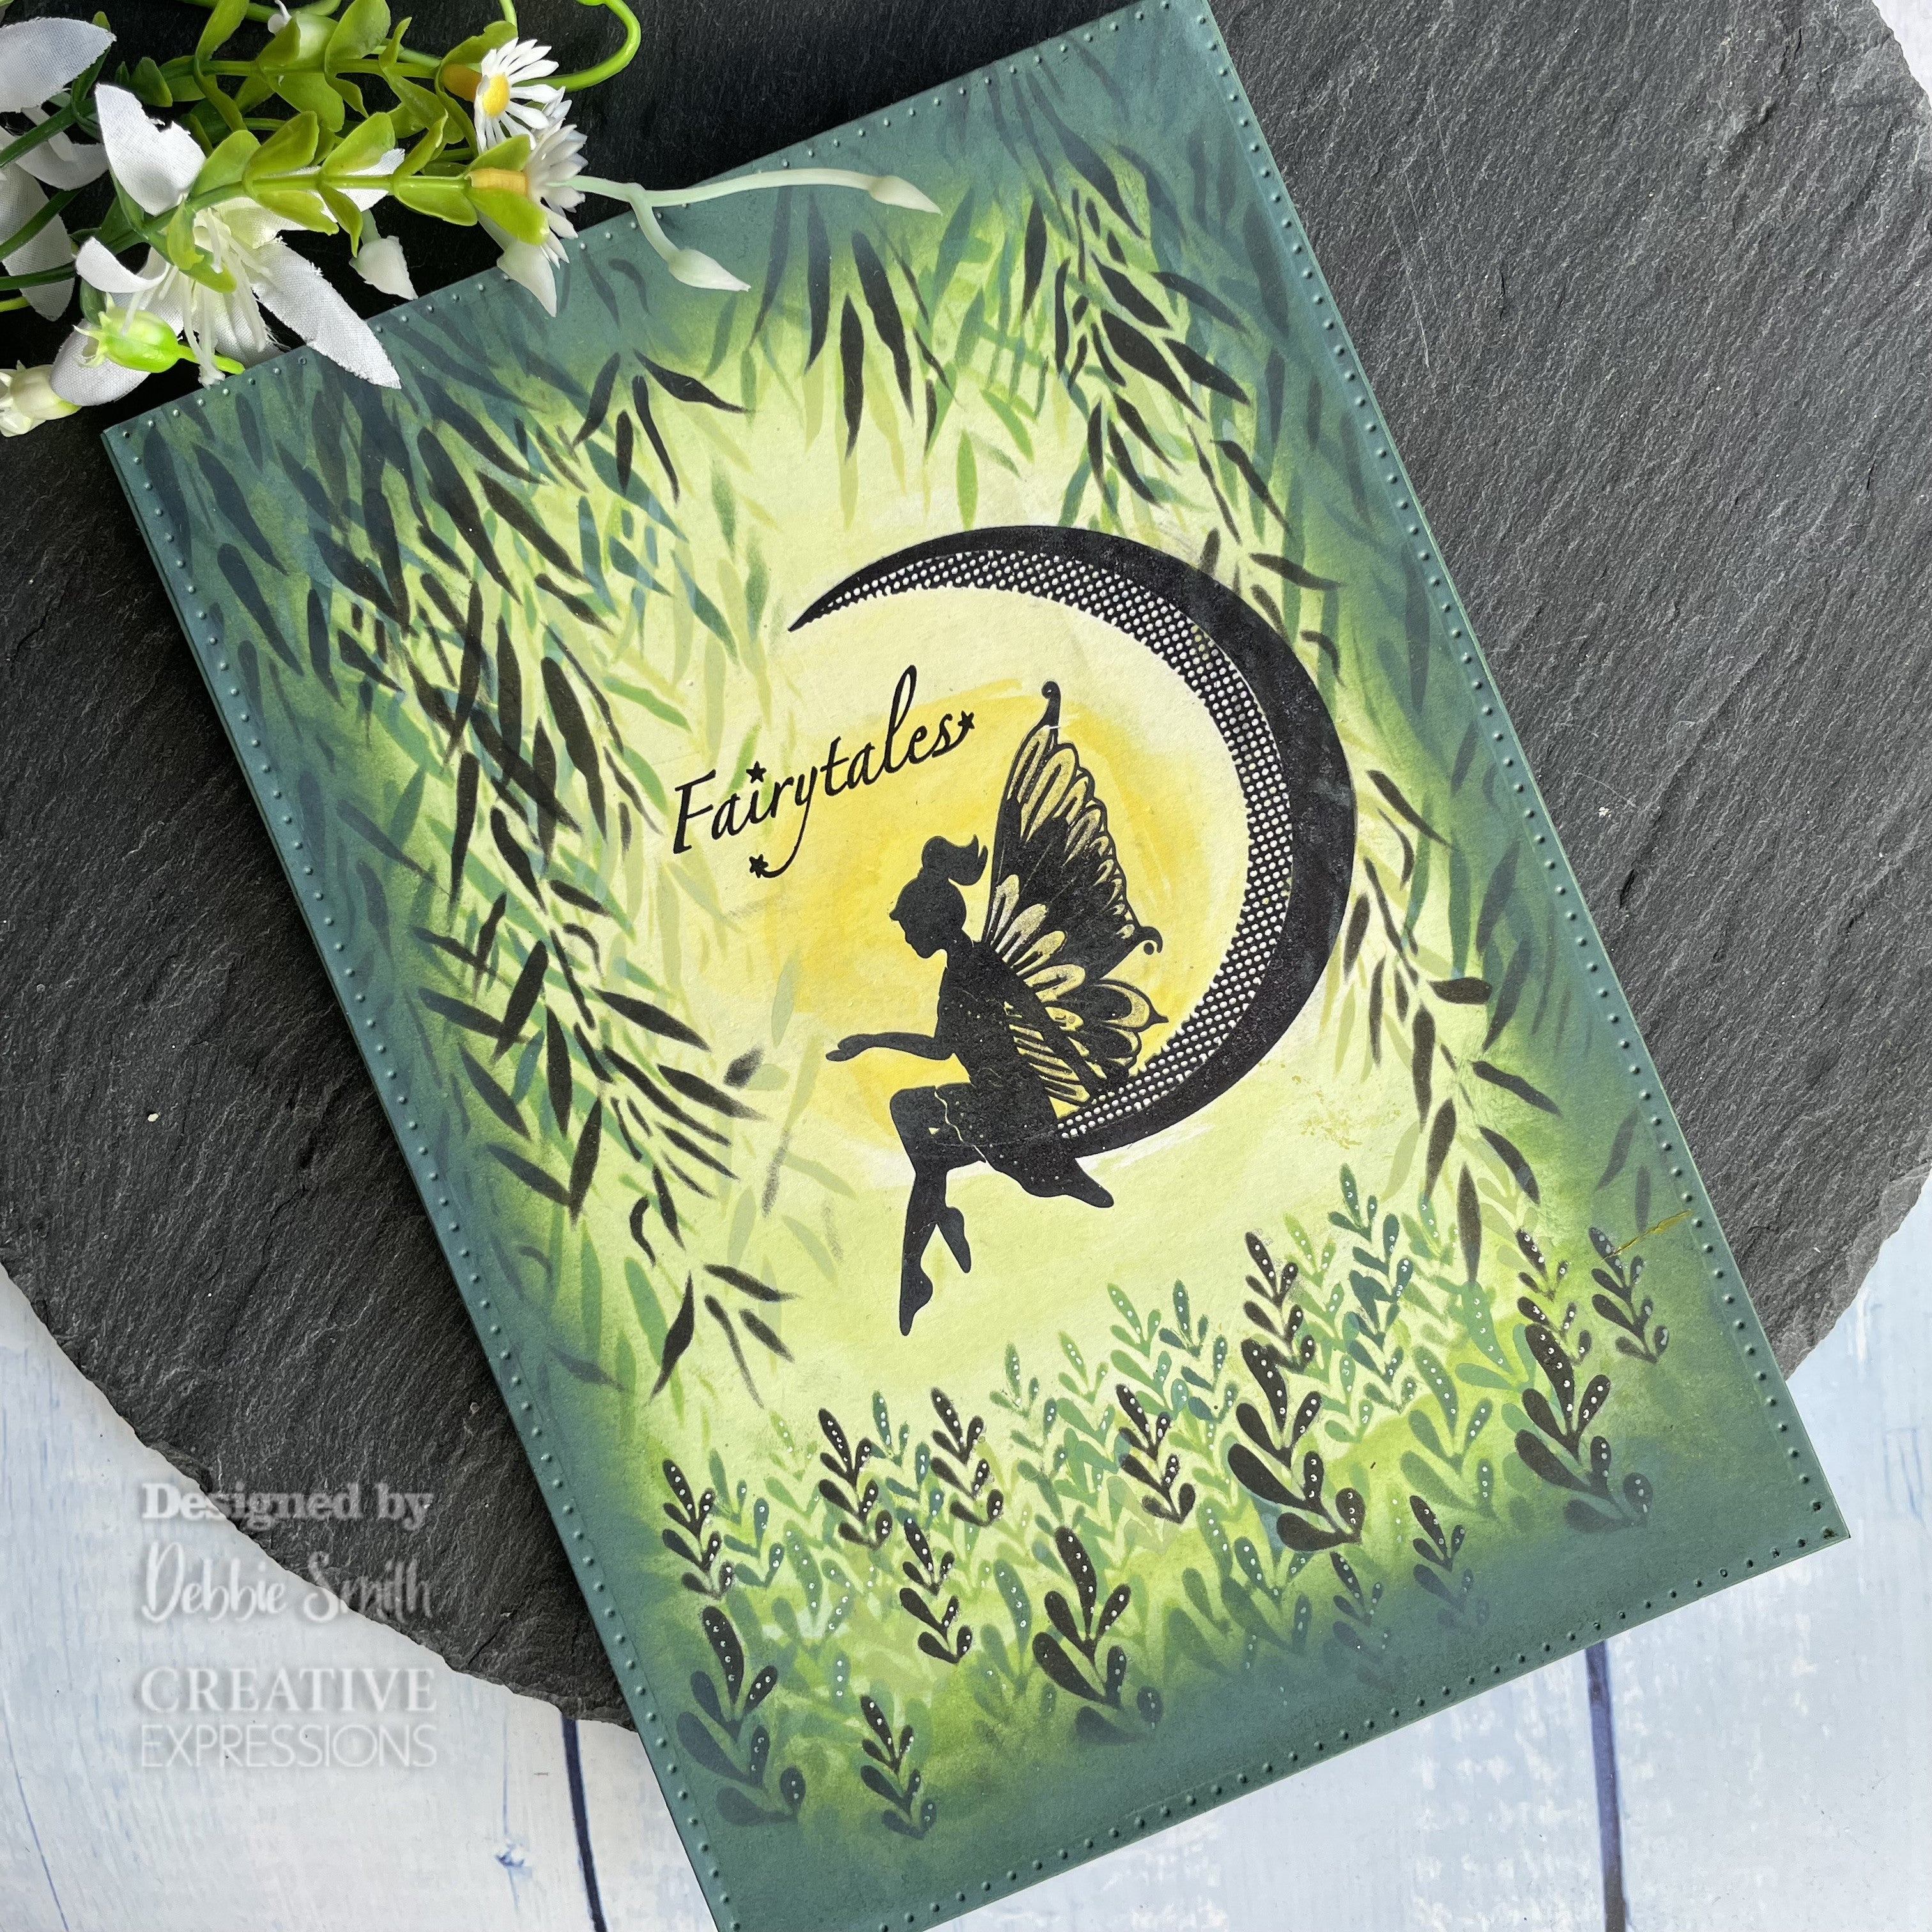 Creative Expressions Weeping Willow DL Stencil